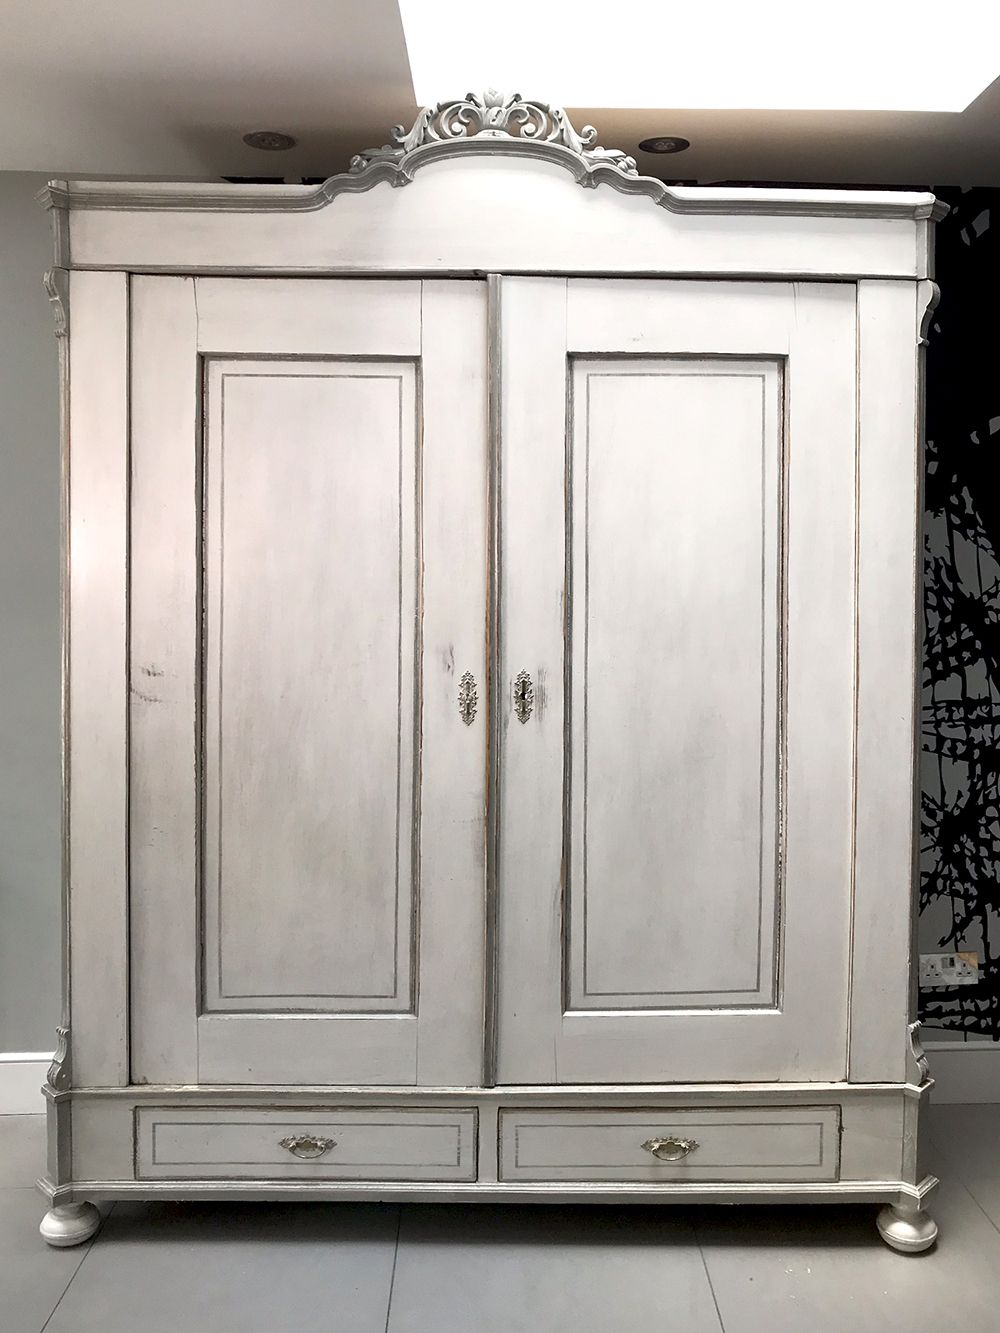 Antique French Painted Armoire – Sold | Napoleonrockefeller – Vintage And  Retro Furniture, Bespoke Hand Crafted Chairs And Seating Pertaining To French Armoire Wardrobes (View 11 of 15)